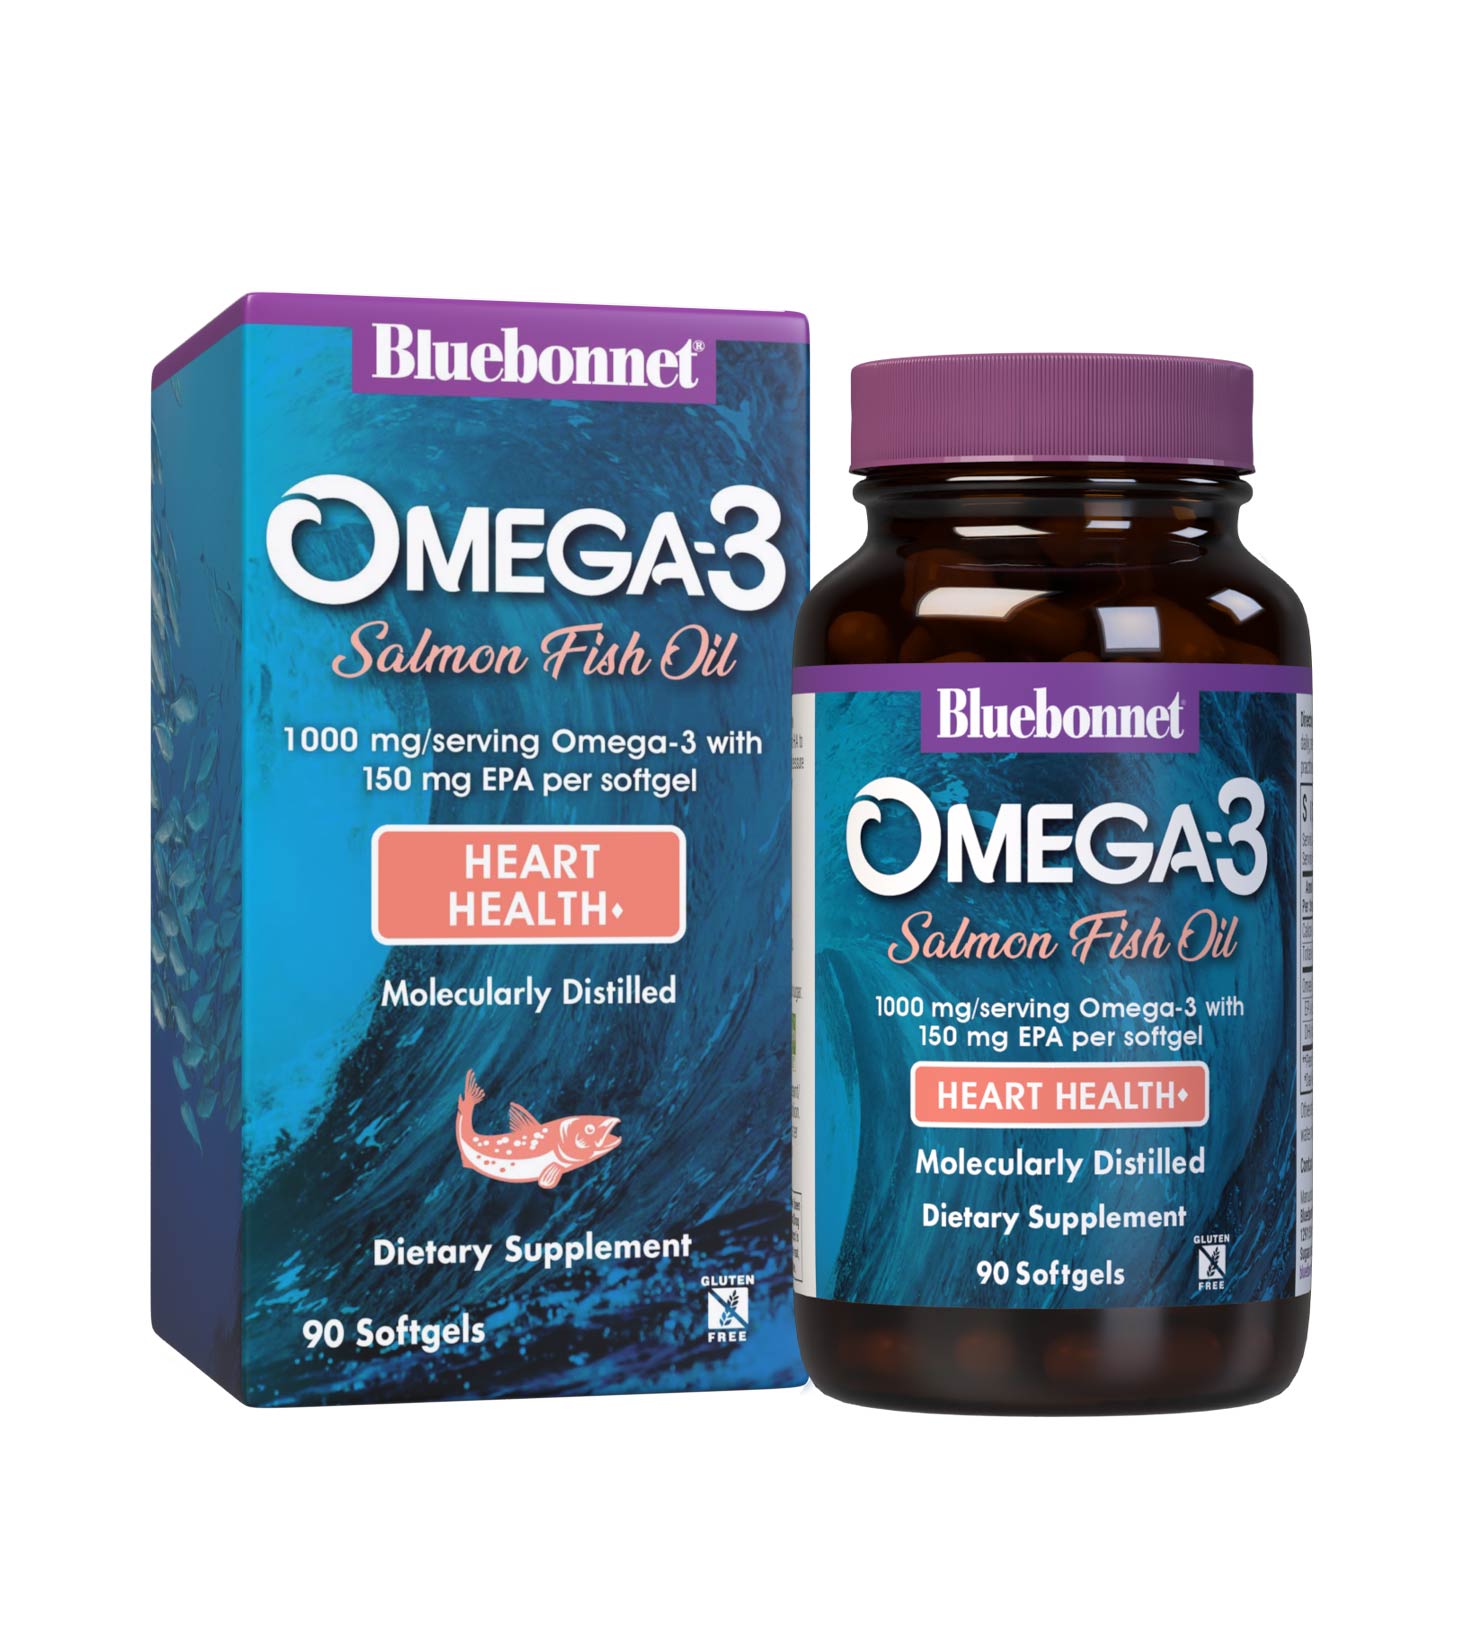  Nature Made Fish Oil Supplements 1000 mg Softgels, Omega 3 for  Healthy Heart Support, 250 Softgels, 125 Day Supply : Health & Household